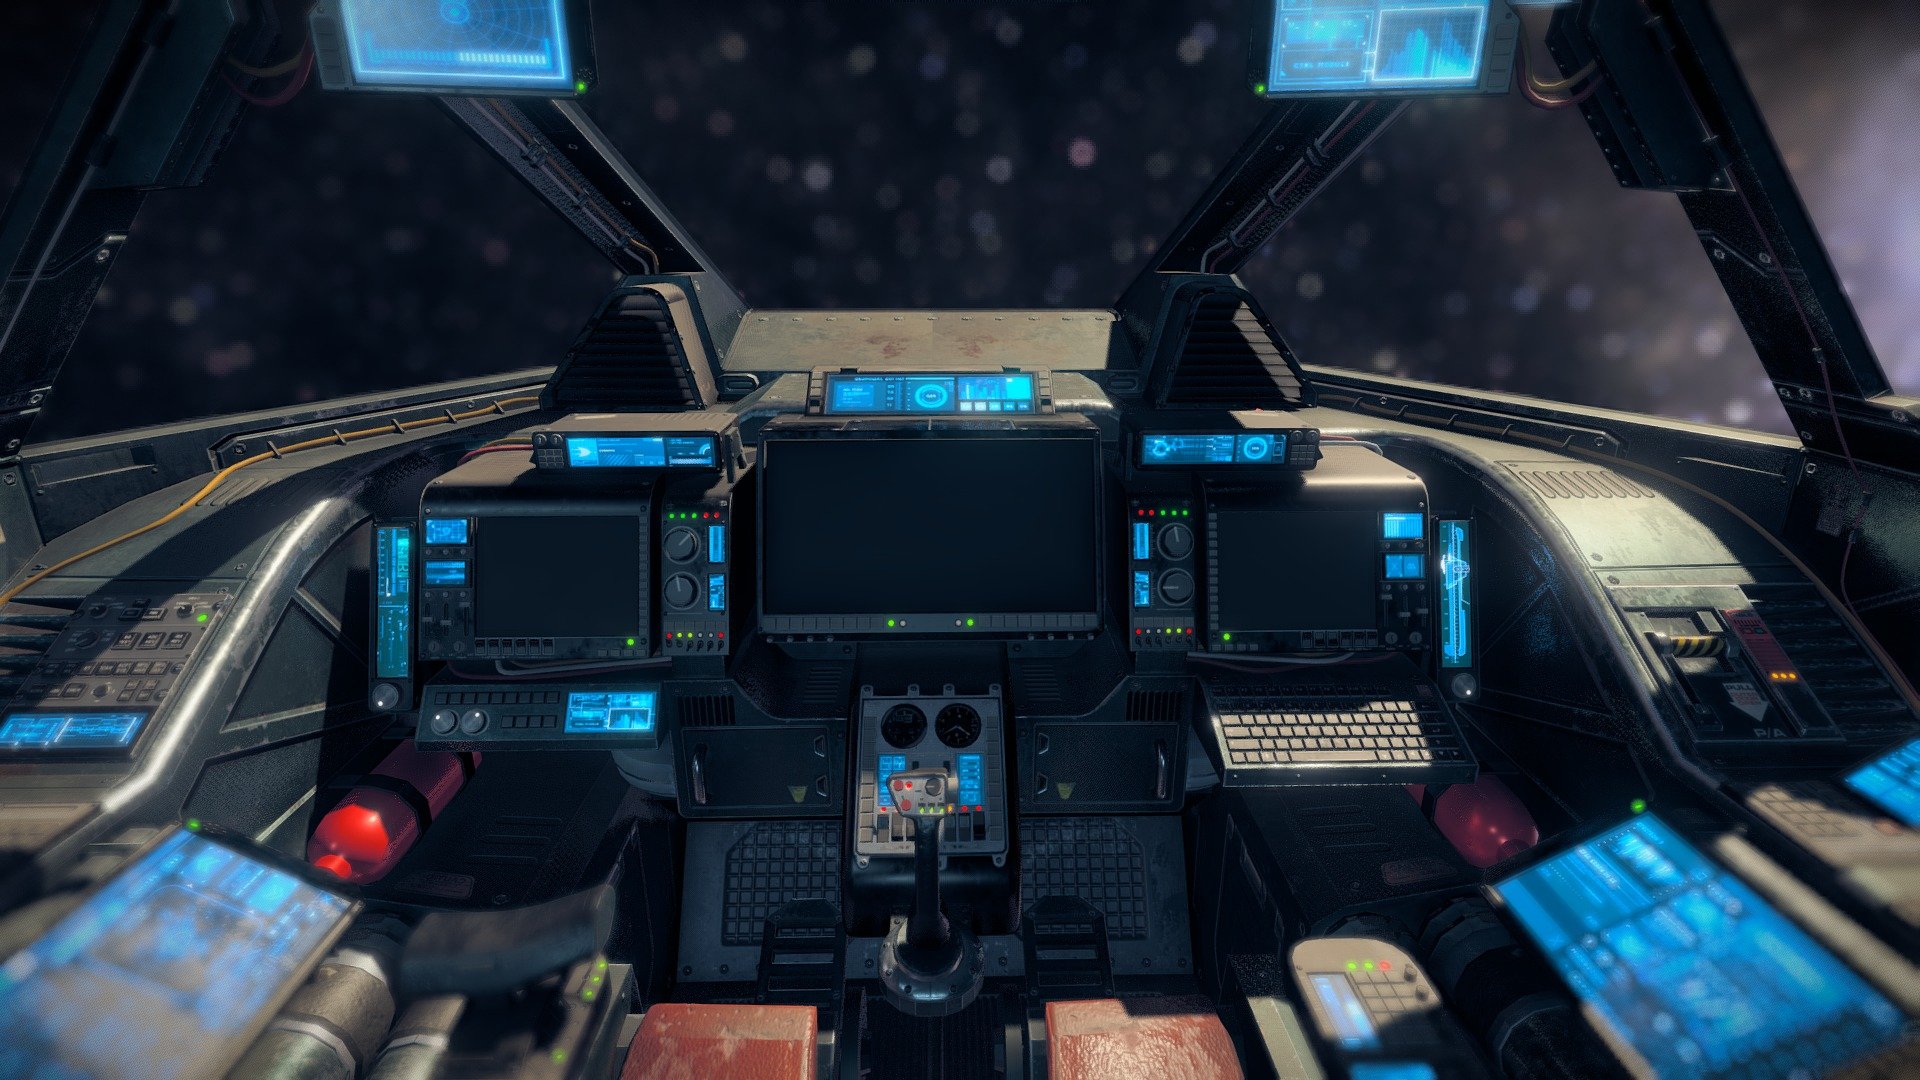 Heavy Fighter Cockpit low-poly 3d model ready for Virtual Reality (VR), Augmented Reality (AR), games and other real-time apps.

AAA Quality, highly detailed sci-fi cockpit, perfect for any space-sim or VR experience. With 4K resolution PBR Textures.

This Package contains: 
1 FBX Containing 4 meshes: Body, Glass, Joystick and Throttle Control, both pivoted correctly for easy animating.

****Textures: 
All textures provided in .psd or .png format. 
This asset contains 2 main materials: Body and Glass 
- The body texures come in 3 variants (Clean, Weathered, Rusty). 
Each variant has it's own Albedo, Metallic, Roughness and Normal Textures. 
AmbientOcclusion and Emission are shared between all variants. 
For each variant, a PSD file is provided for the Albedo texture (Customize metal and leather color) 
The Emissive texture is also a PSD (Customize screen colors)




The glass textures come in 4 variants (Clean, Dirty, Scratched, Dirty&amp;Scratched) 
The AmbientOcclusion texture is shared between all variants.
 - Sci fi Cockpit 1 Heavy Fighter - 3D model by VattalusAssets 3d model